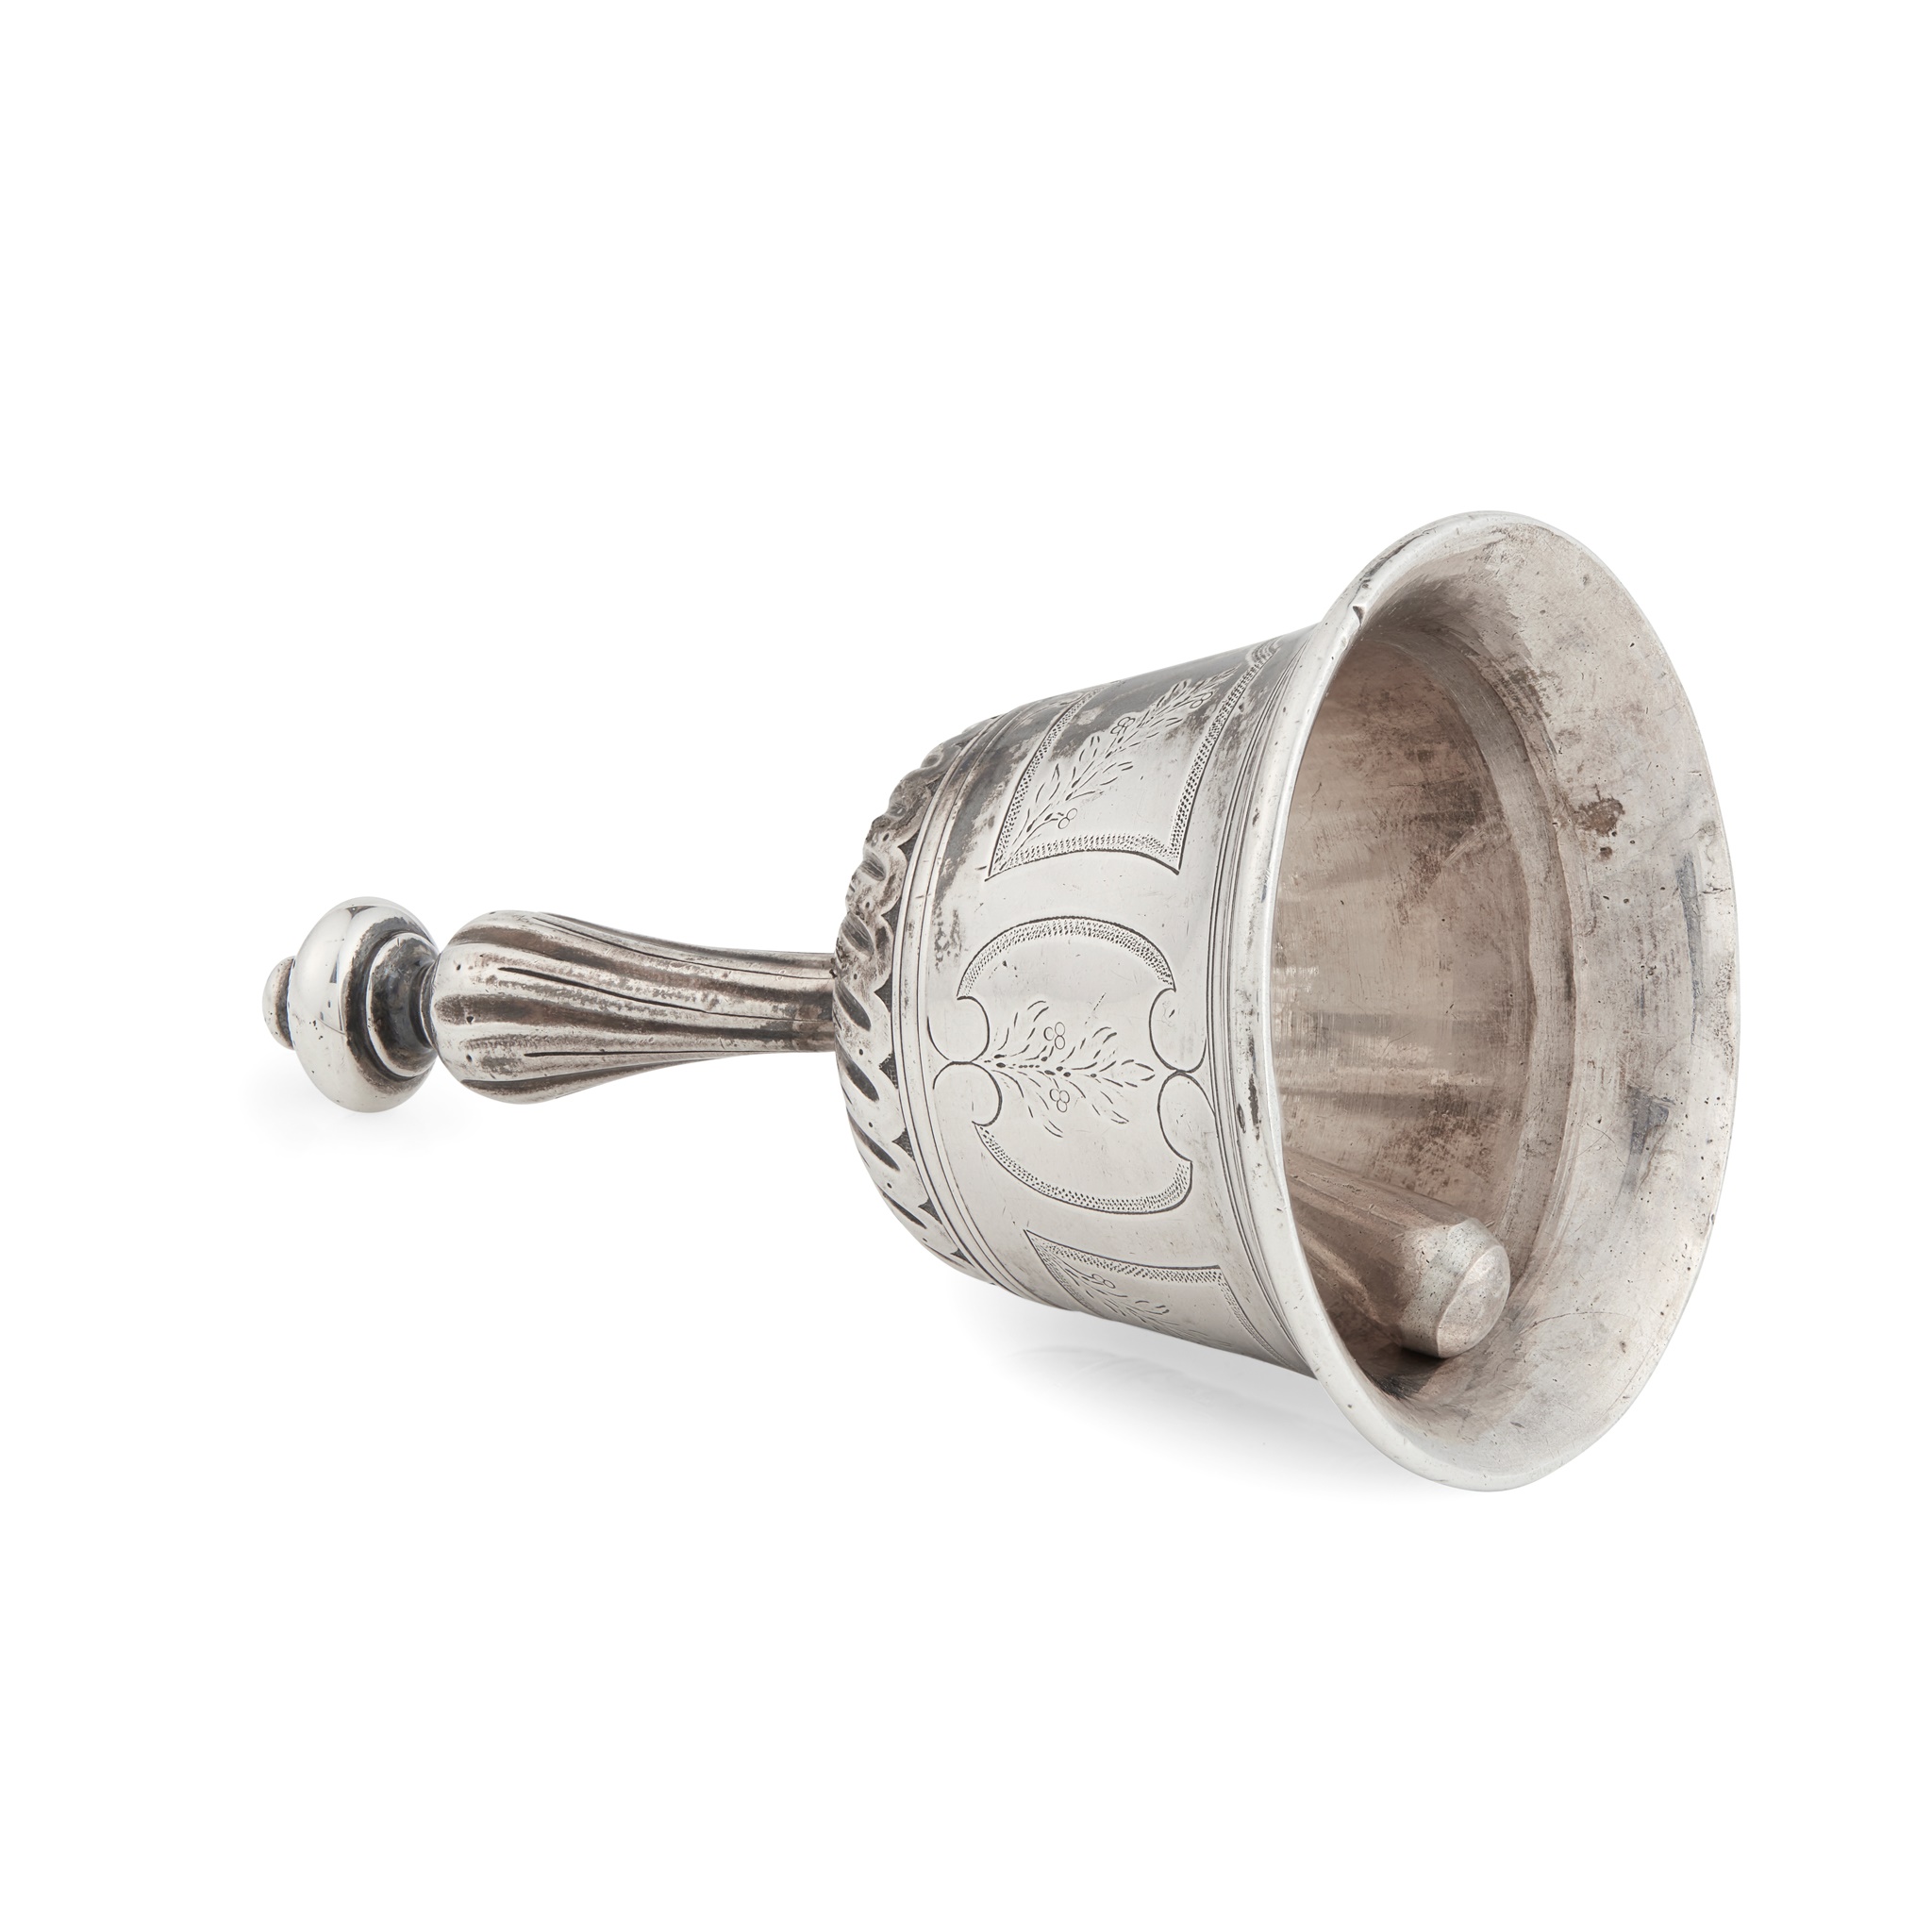 An early 18th-Century French table bell - Image 3 of 4